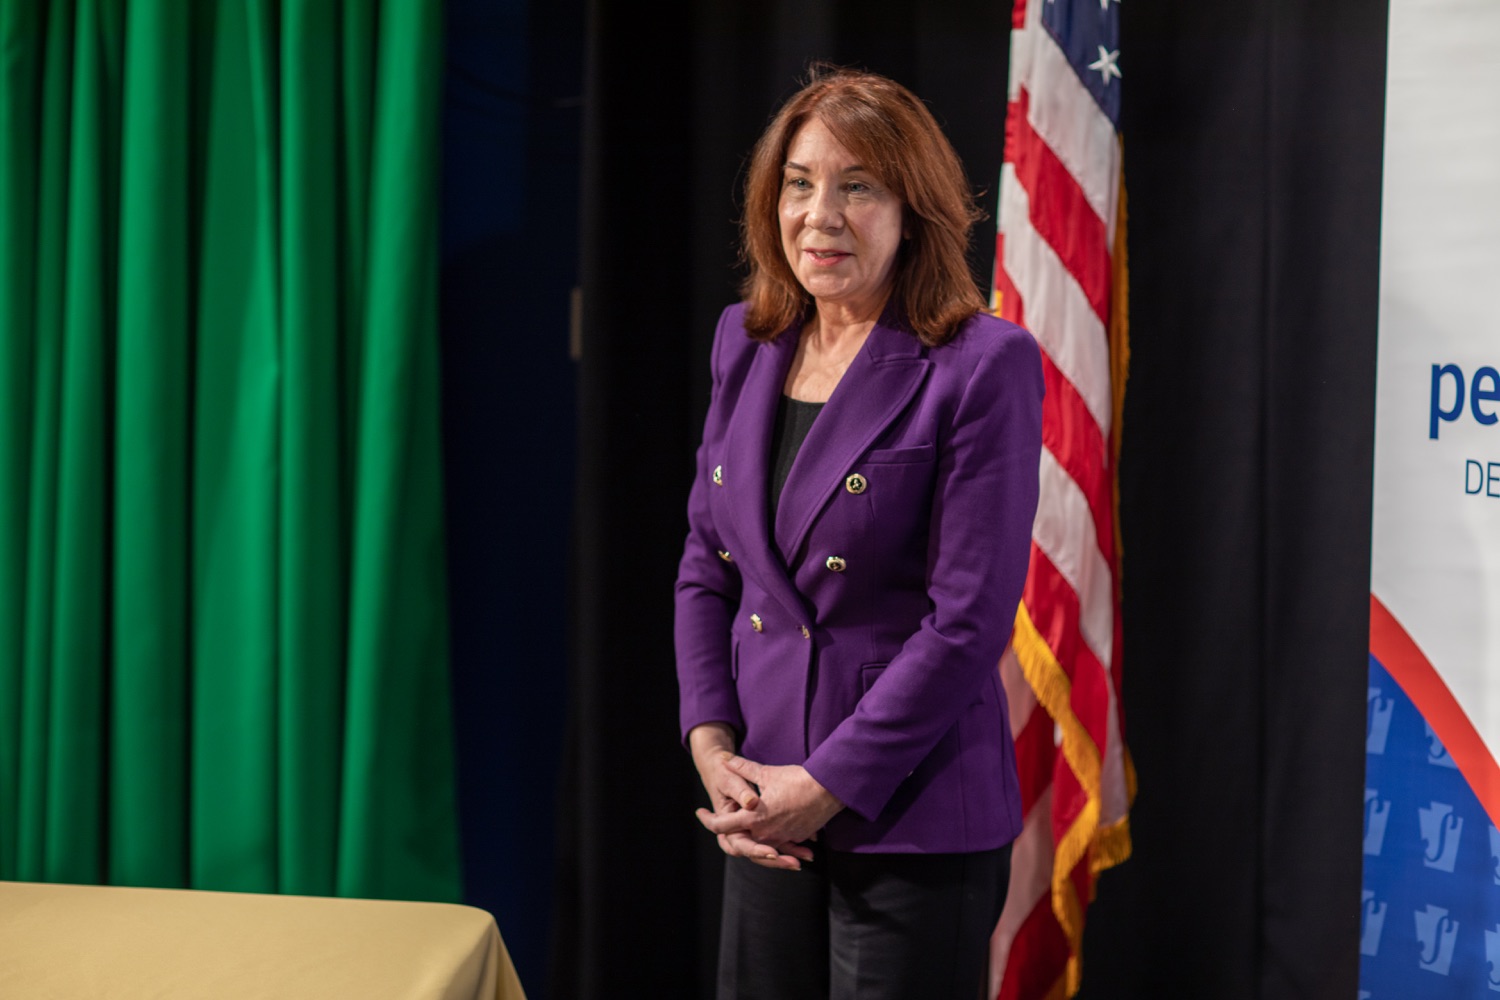 Executive Deputy Secretary Pam Iovino helps launch a statewide risk-limiting audit (RLA) of the 2022 midterm election by the rolling of 10-sided dice to generate the random 20-digit seed number counties will use to retrieve batches of ballots to be audited.<br><a href="https://filesource.amperwave.net/commonwealthofpa/photo/22366_DOS_AuditDice_06.jpeg" target="_blank">⇣ Download Photo</a>